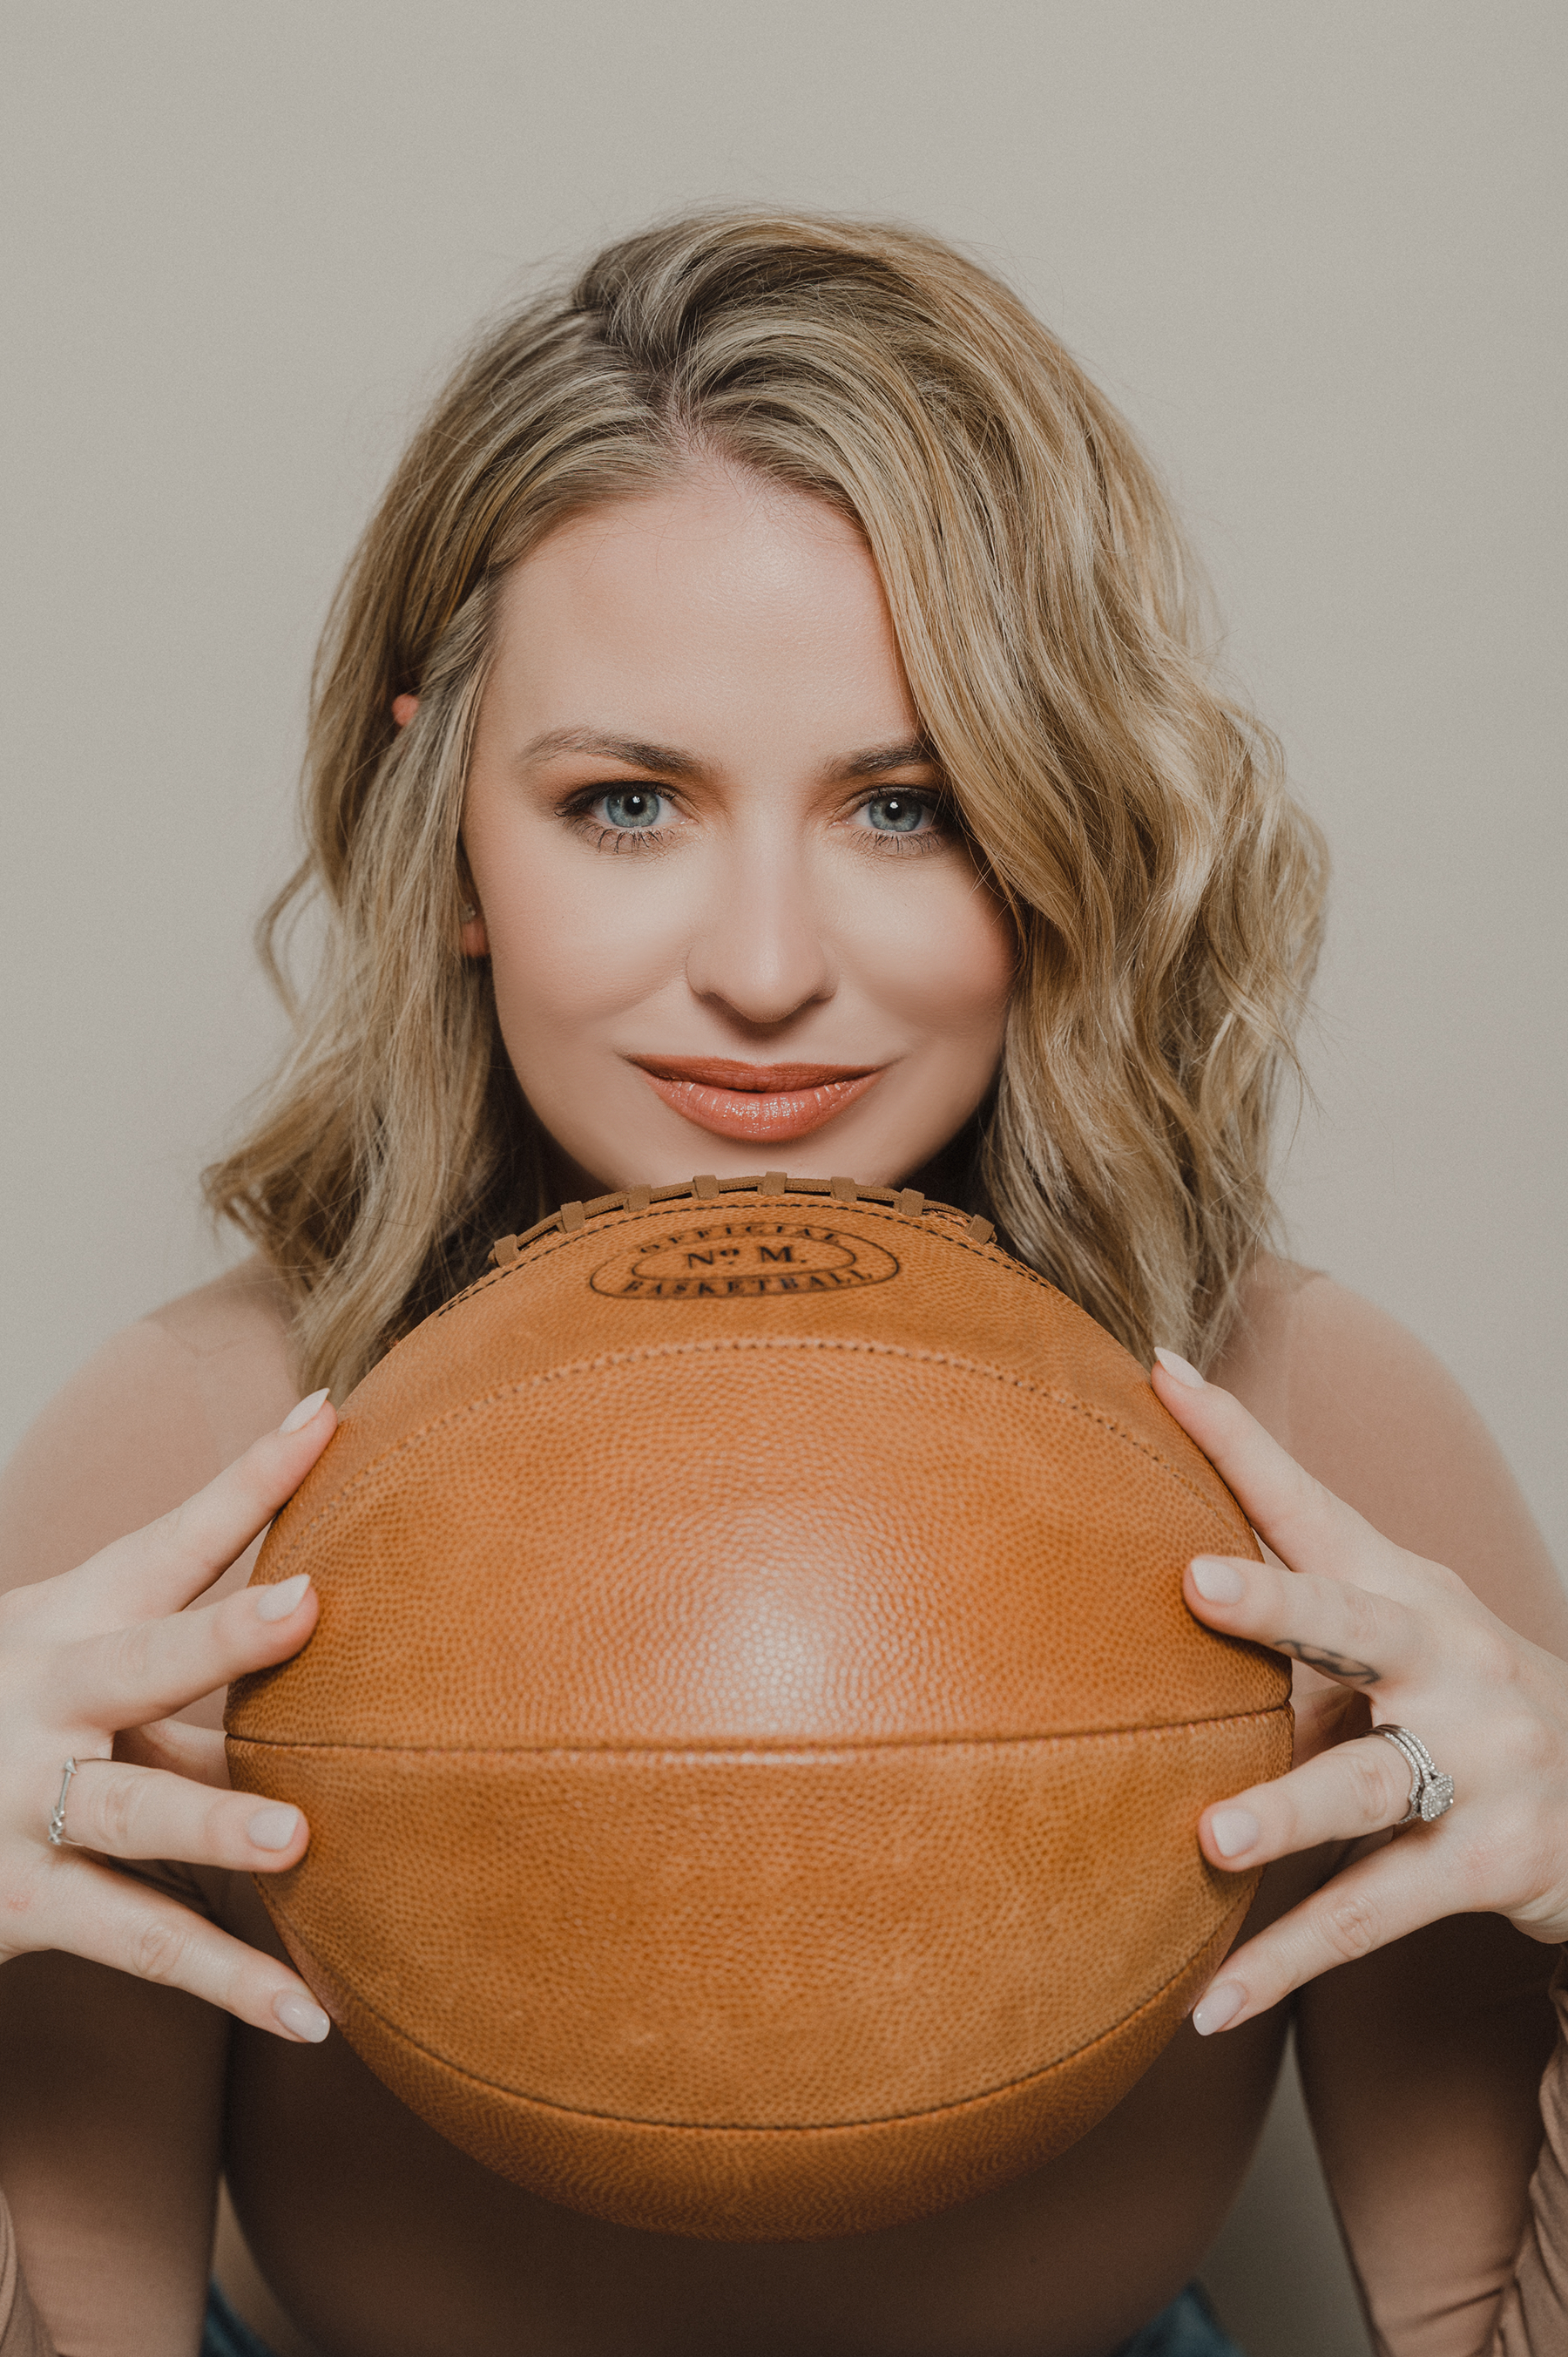 Founder and CEO of positionless, Kristen Ledlow